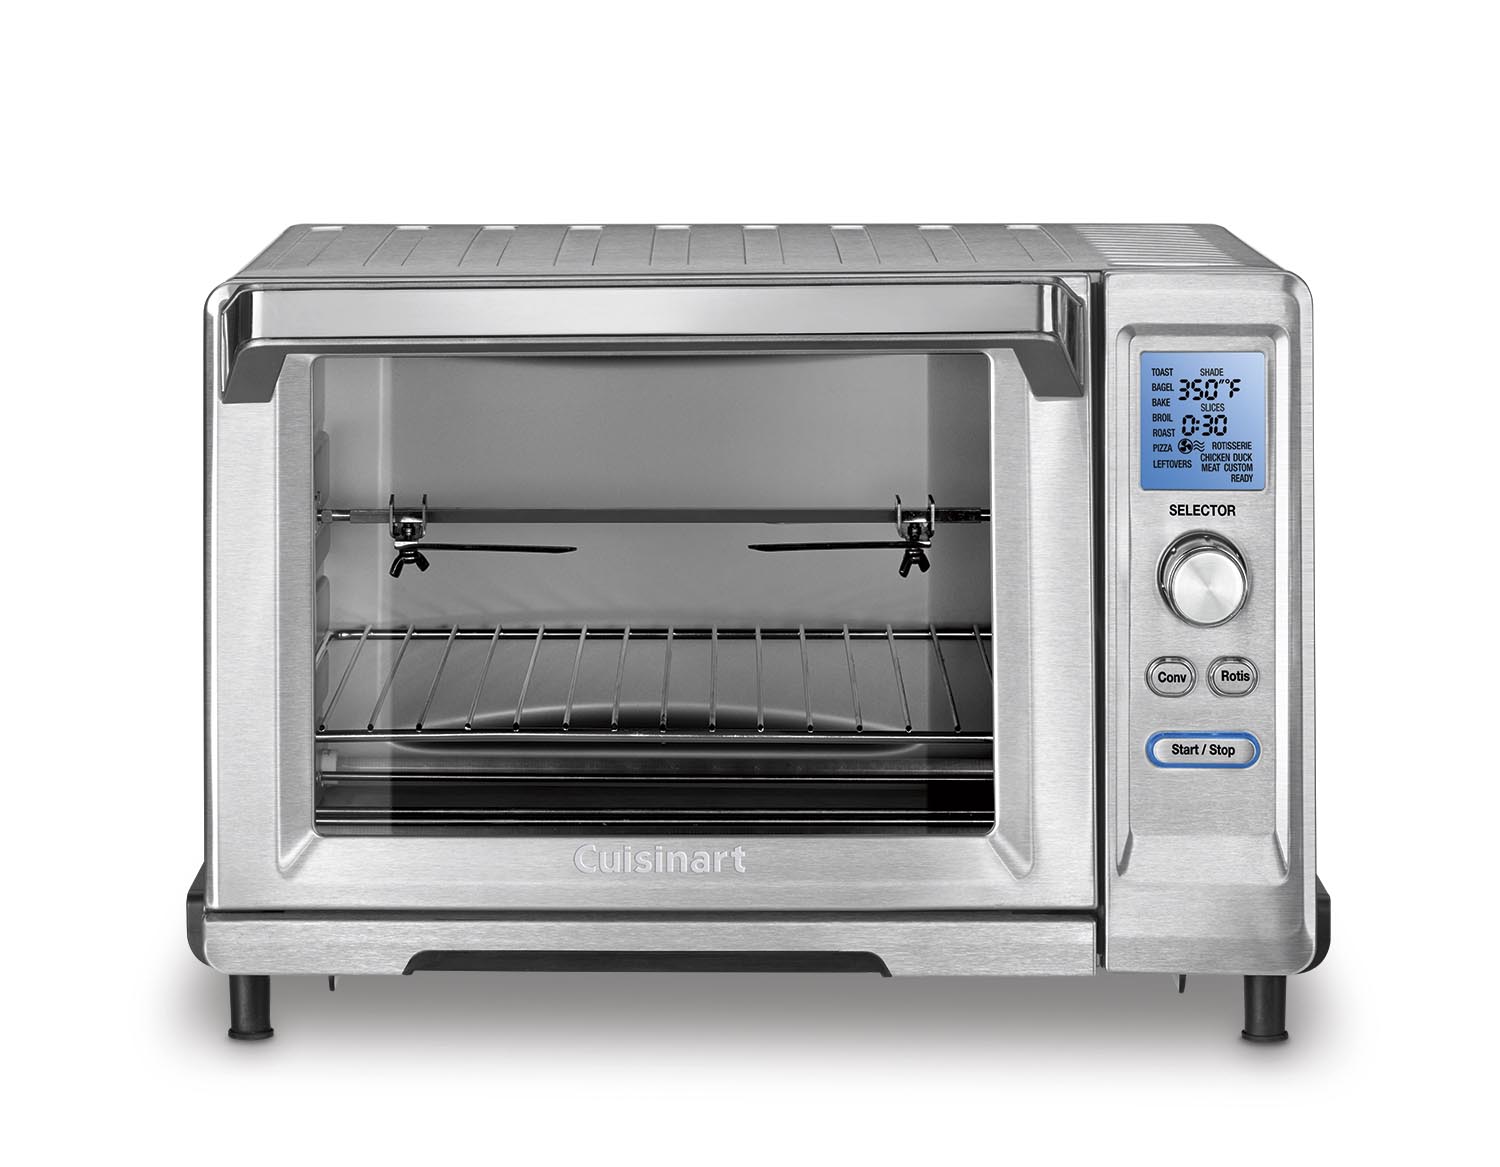 Cuisinart TOB-200 - Electric oven - 24 qt - 1.9 kW - brushed stainless steel - image 4 of 4